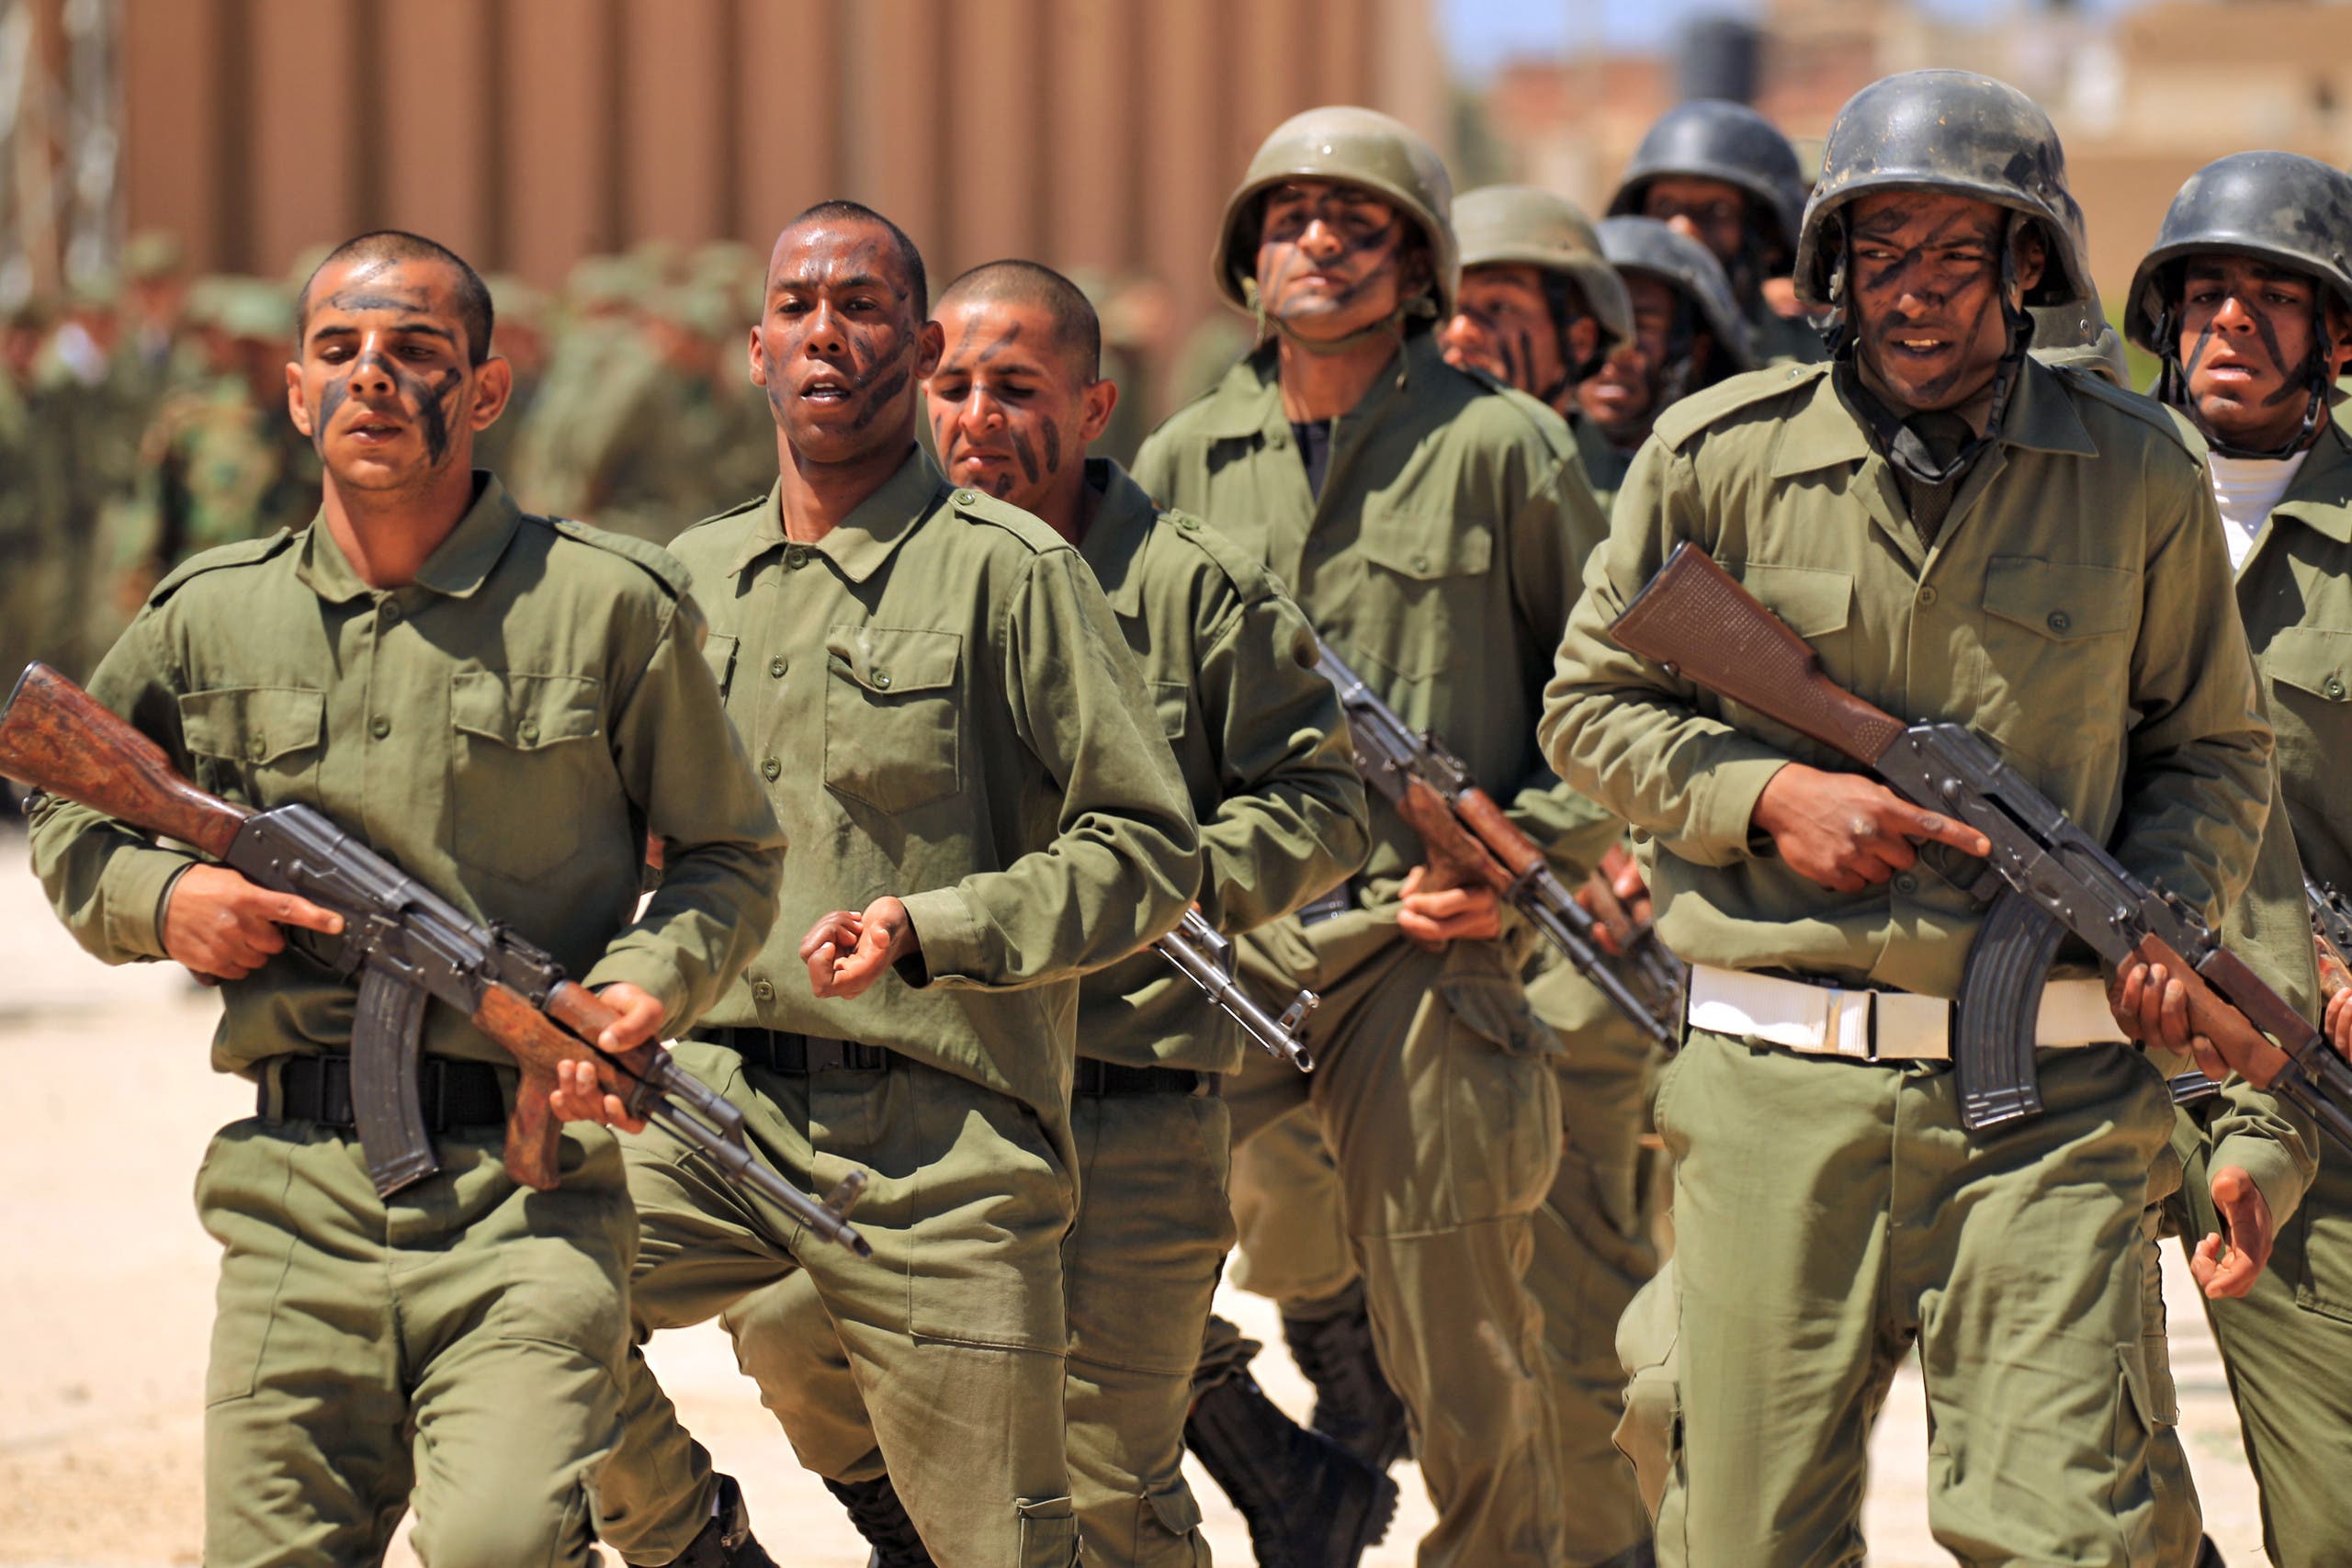 Fighters from the Libyan National Army attend their graduation ceremony at a military academy in Libya's eastern city of Benghazi on April 17, 2019. (AP)